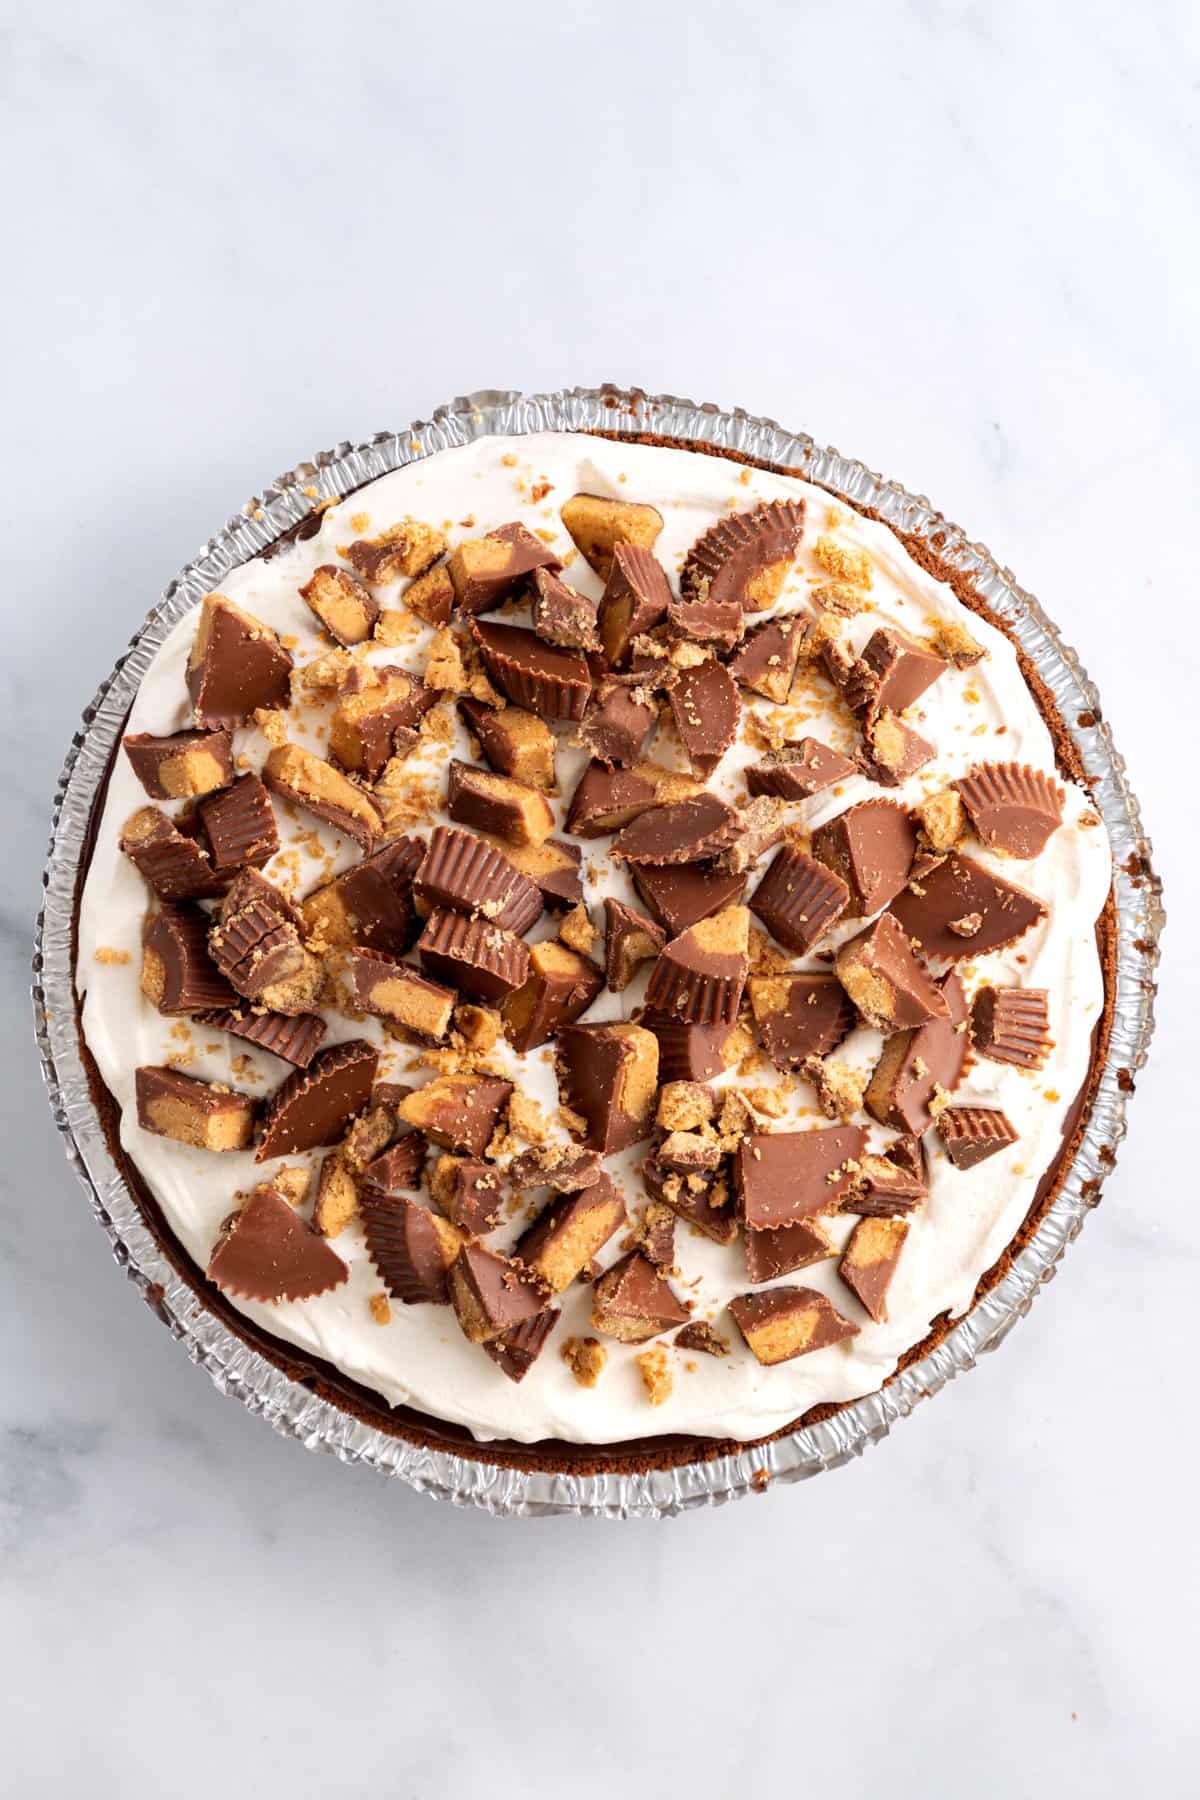 store-bought chocolate pie crust with peanut butter filling and chocolate ganache topped with whipped topping and chopped peanut butter cups.